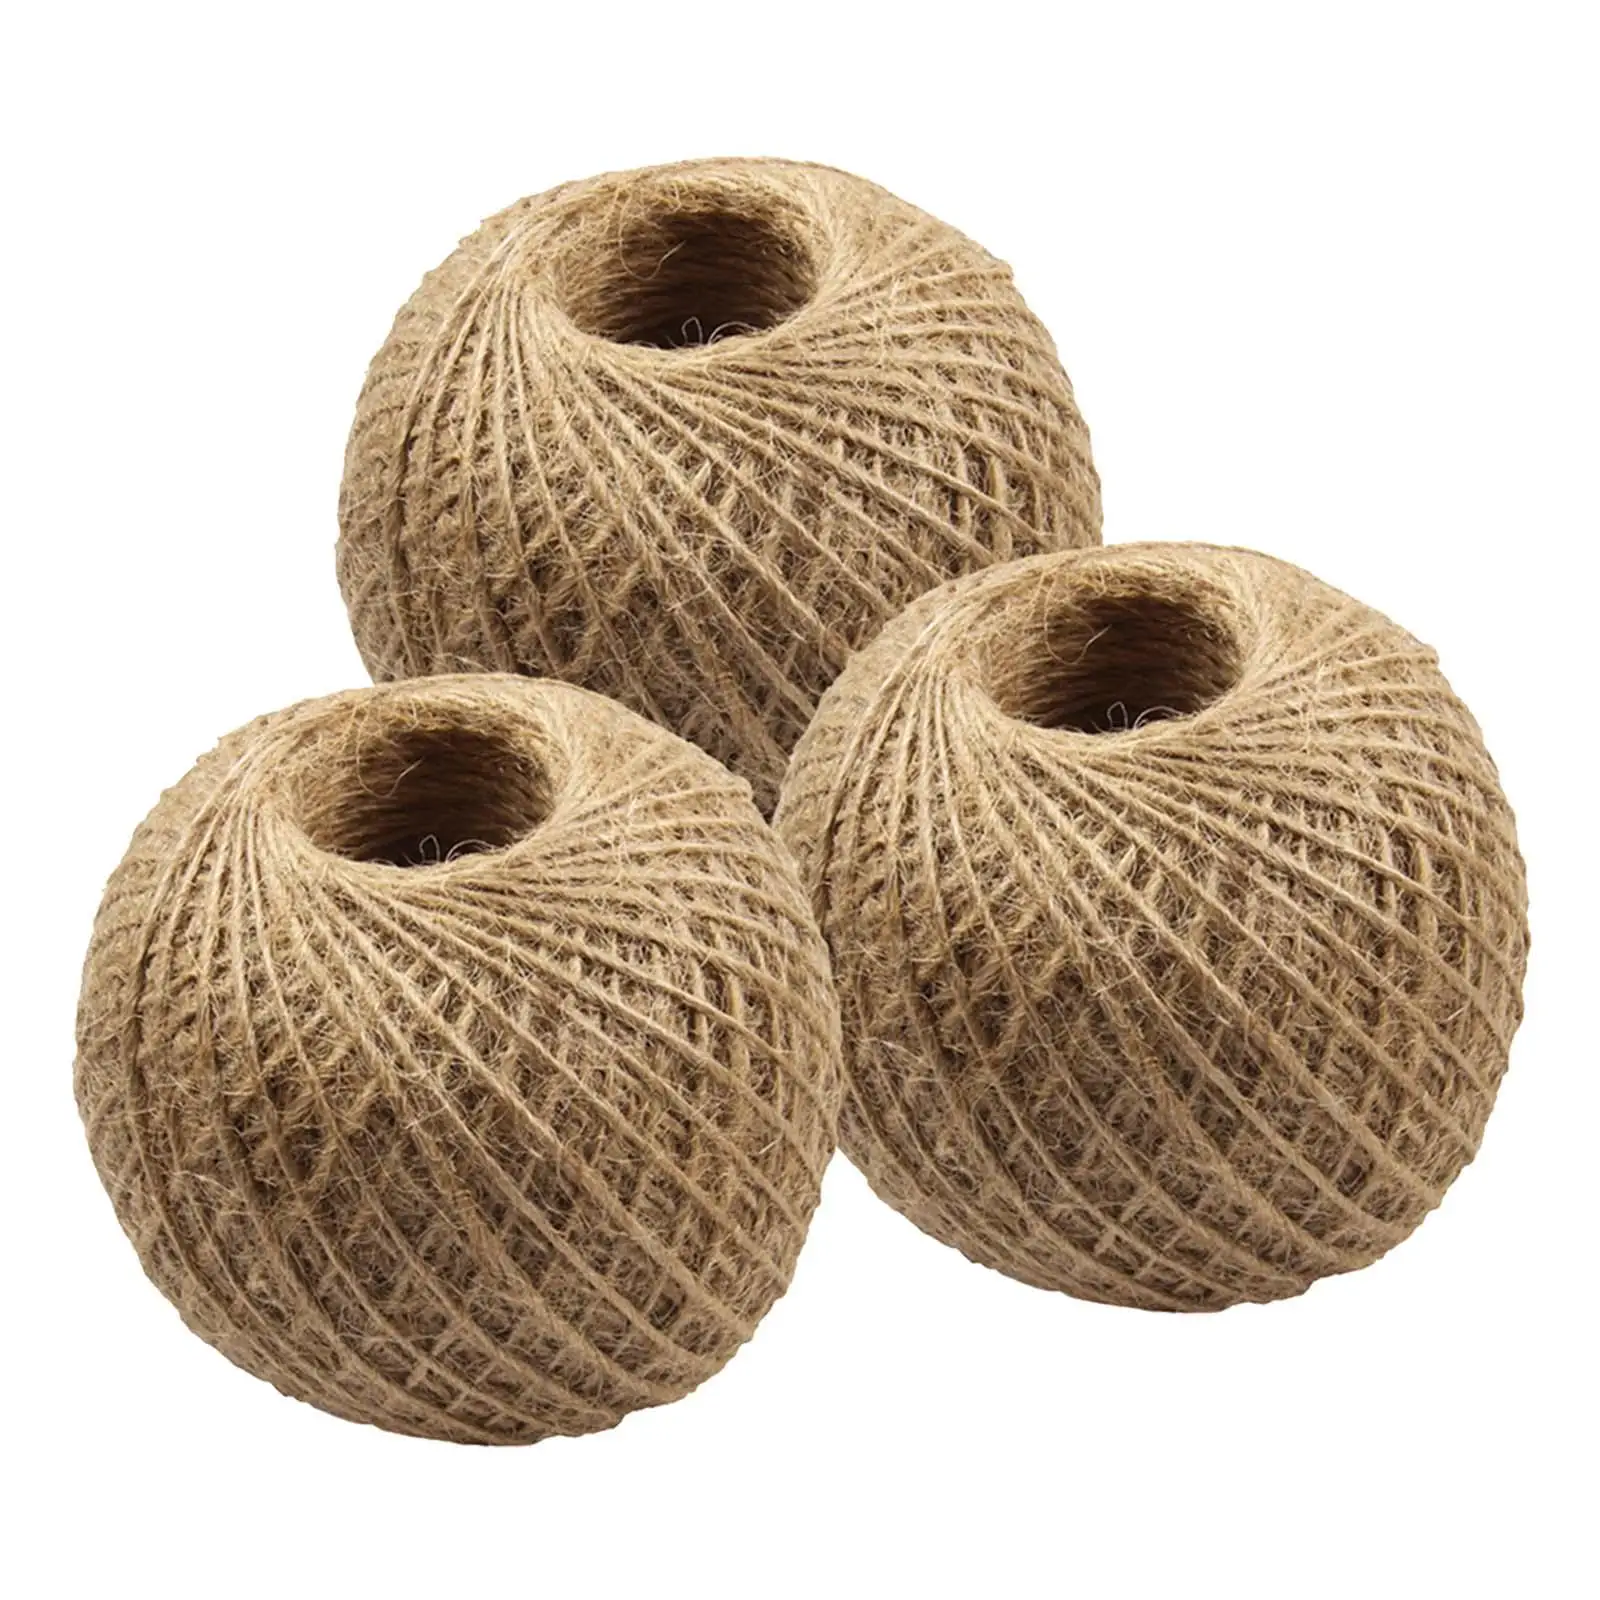 3x Burlap String Roll 80M for Bakers Twine Industrial Packing Materials Bakery Boxes Wrapping Arts Crafts Butcher Twine